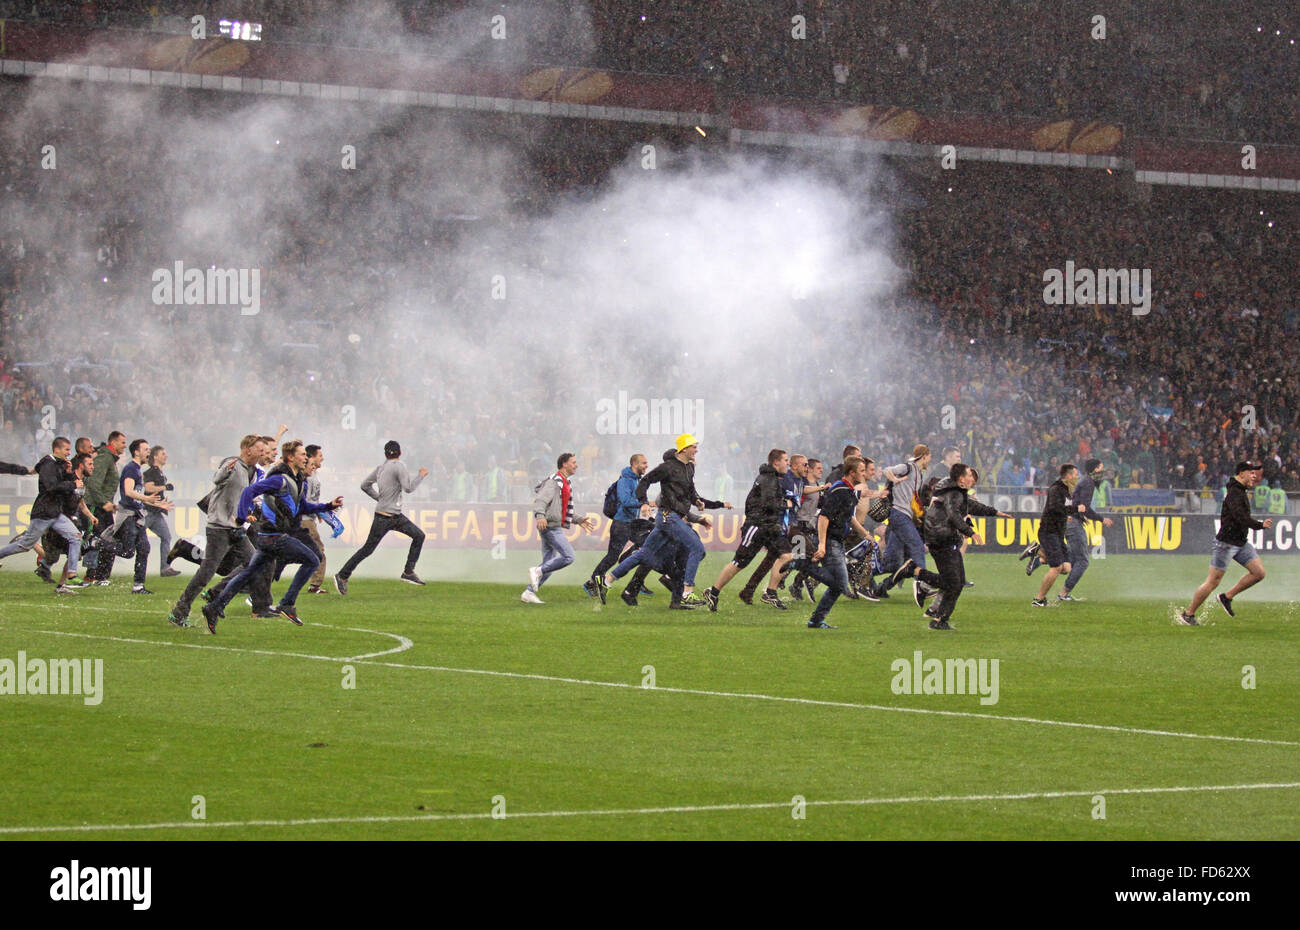 FC Dnipro supporters run out into the pitch to celebrate victory after UEFA Europa League semifinal game against Napoli Stock Photo